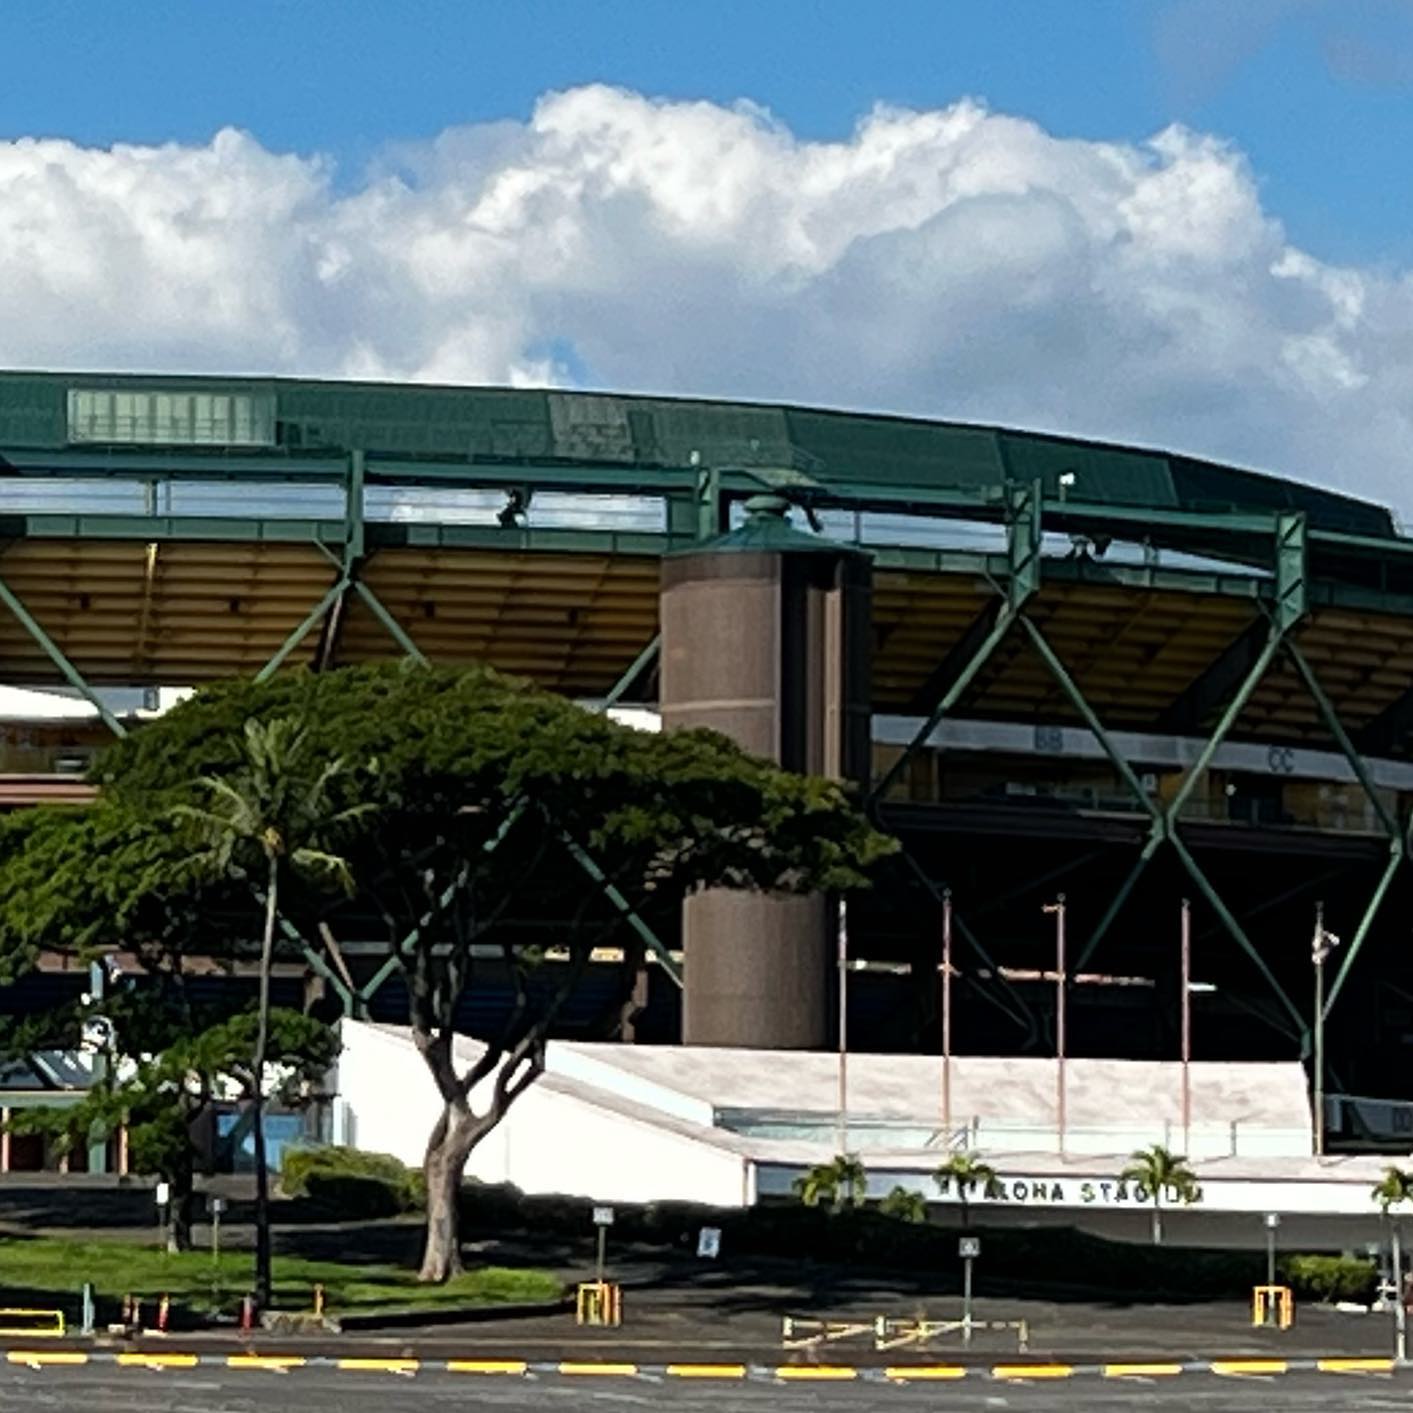 Couldn’t leave Honolulu without getting a glimpse at the old Aloha Stadium. This is as close as I could get to it, since it’s set to be torn down later this year. A new, smaller stadium will be built in its place to house the University of Hawaii football team.The old stadium certainly had its glory days, mainly as the longtime home of the Hawaii Bowl college football game and the NFL’s Pro Bowl. It was also configurable for baseball and soccer.I never saw an event here, but maybe I’ll get a chance to check out the new one!#hawaii #hawaiisports #honolulu #honoluluhawaii #uhwarriors #universityofhawaii #hawaiibowl #probowl #alohastadium #oahu #sportstravel #sportstourism